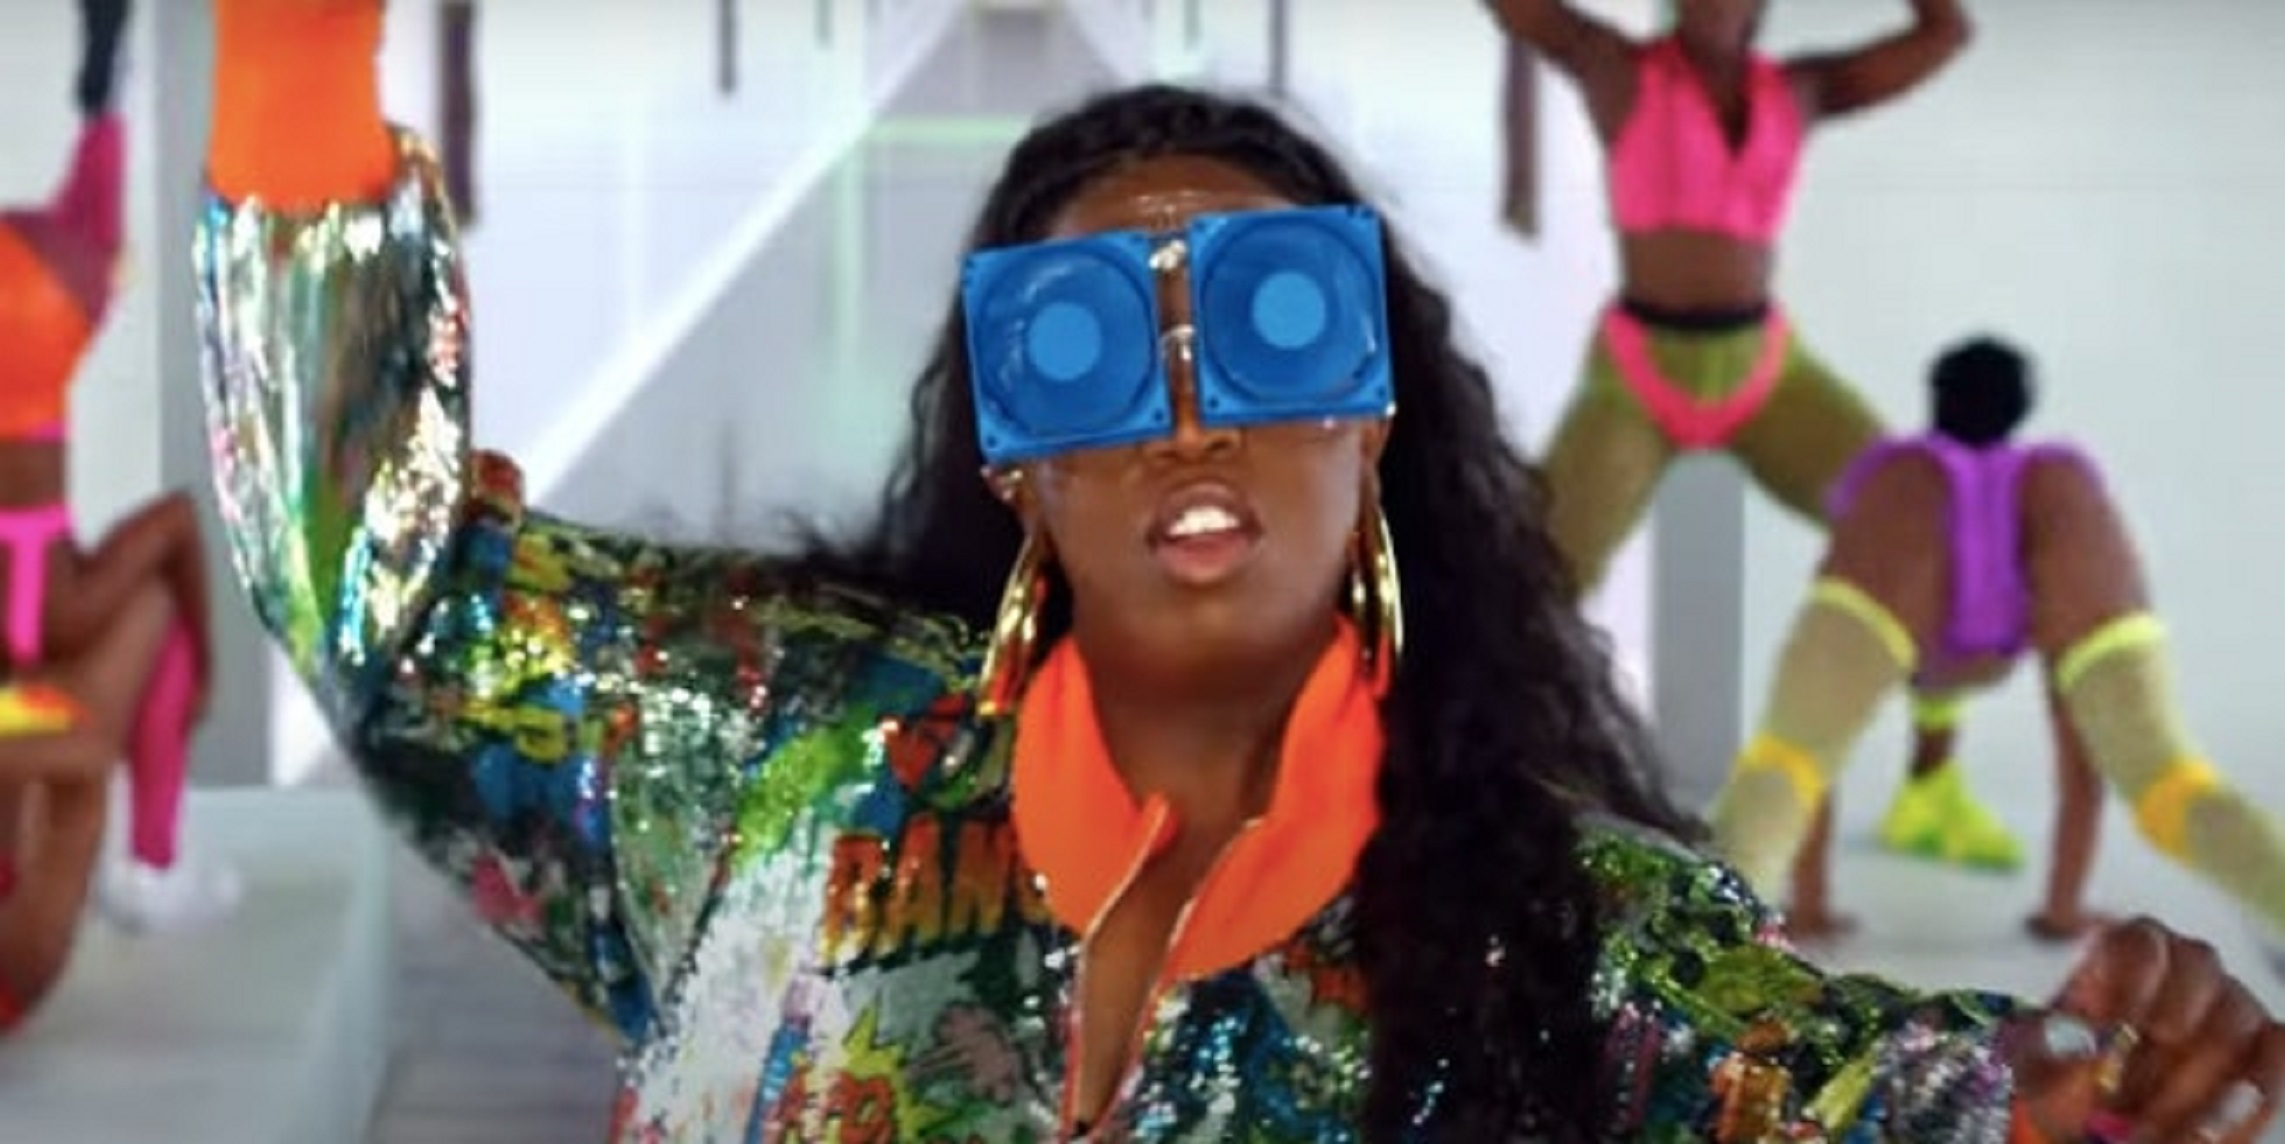 Missy Elliot Is Here To Cool Things Off With New Music Video. Watch Here!